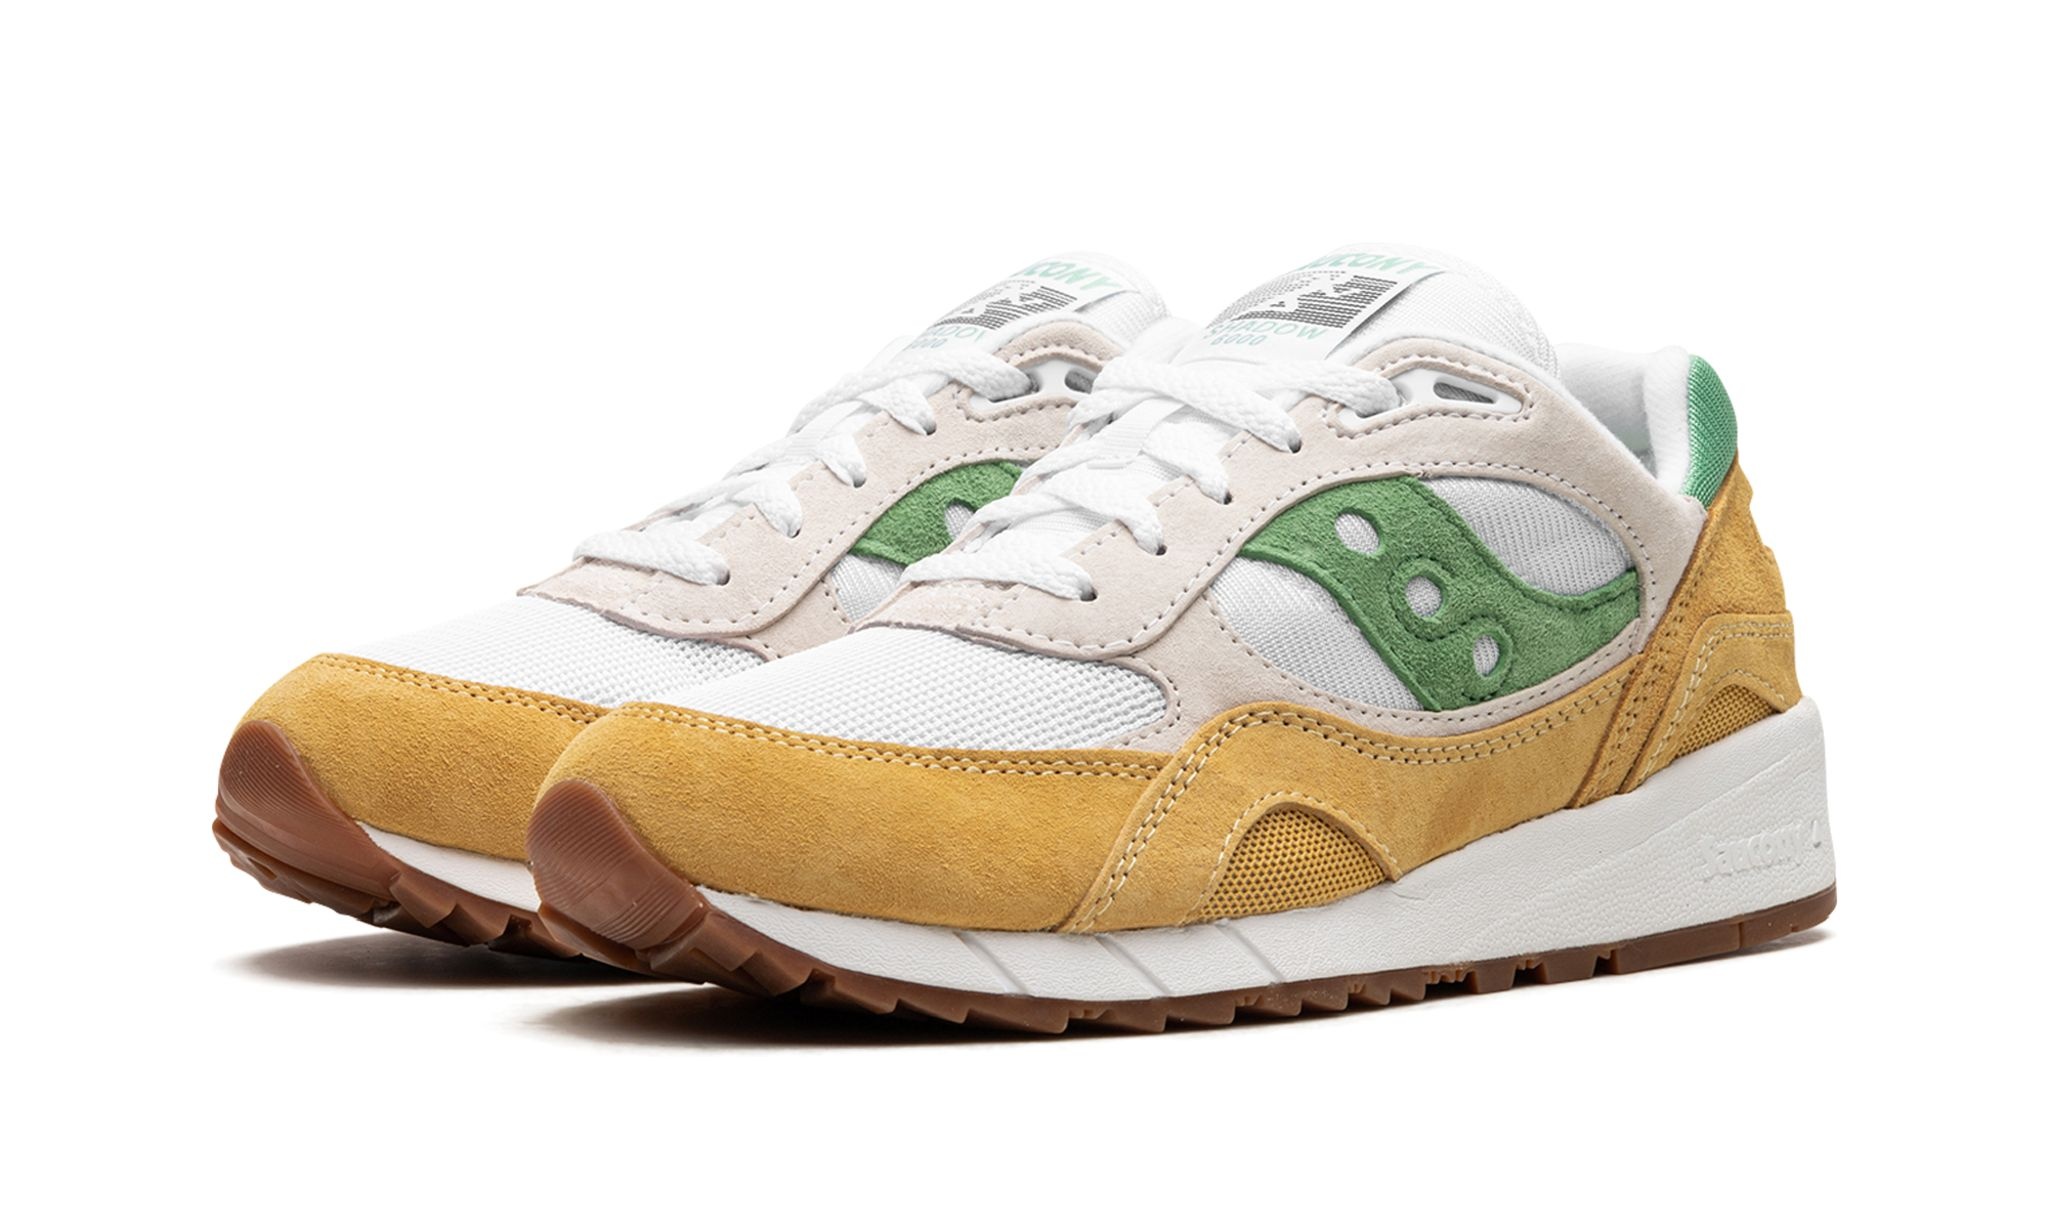 Saucony Shadow 6000 "White/Yellow/Green" - 2